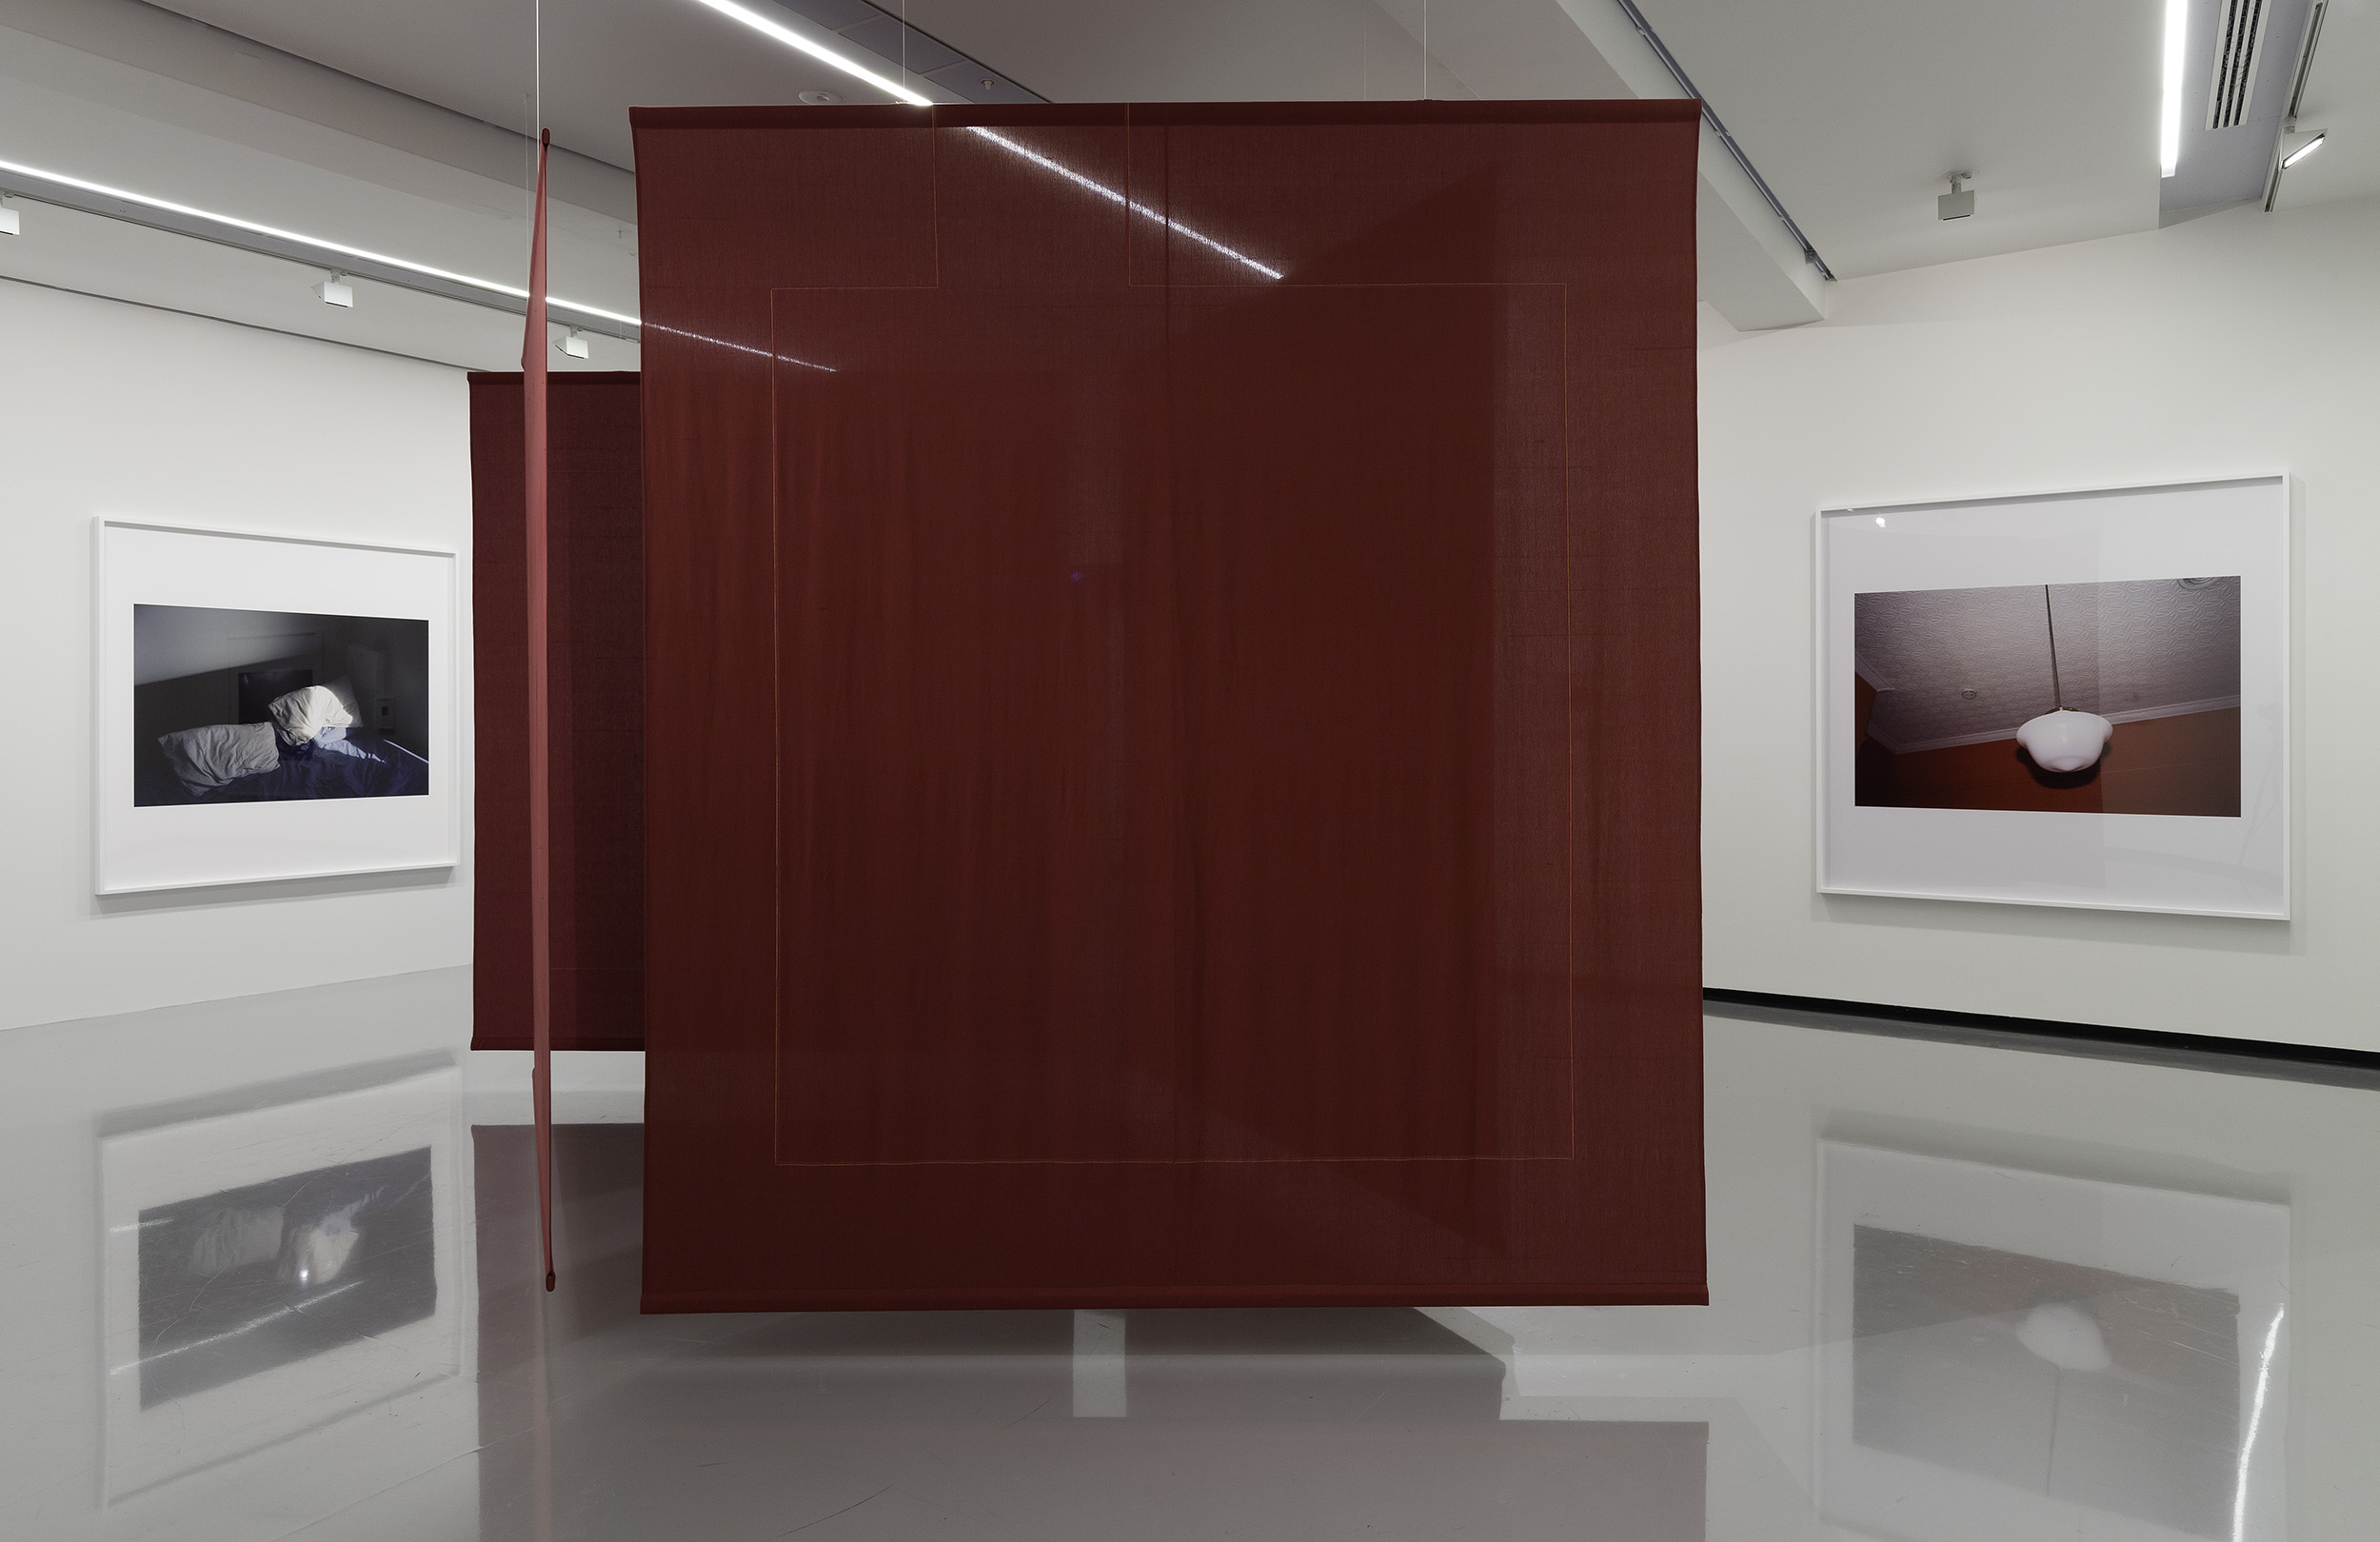 Installation view of Paul Knight, untitled photographs from the series <em>Chamber Music</em>, 2009–, and <em>Lungs</em>, 2023, handwoven cotton bedsheets, wood and stainless steel. Courtesy of the artist and Neon Parc, Naarm/Melbourne. <em>Paul Knight: L’ombre de ton ombre</em>, Monash University Museum of Art, Naarm/Melbourne, 2023. Photo: Christian Capurro